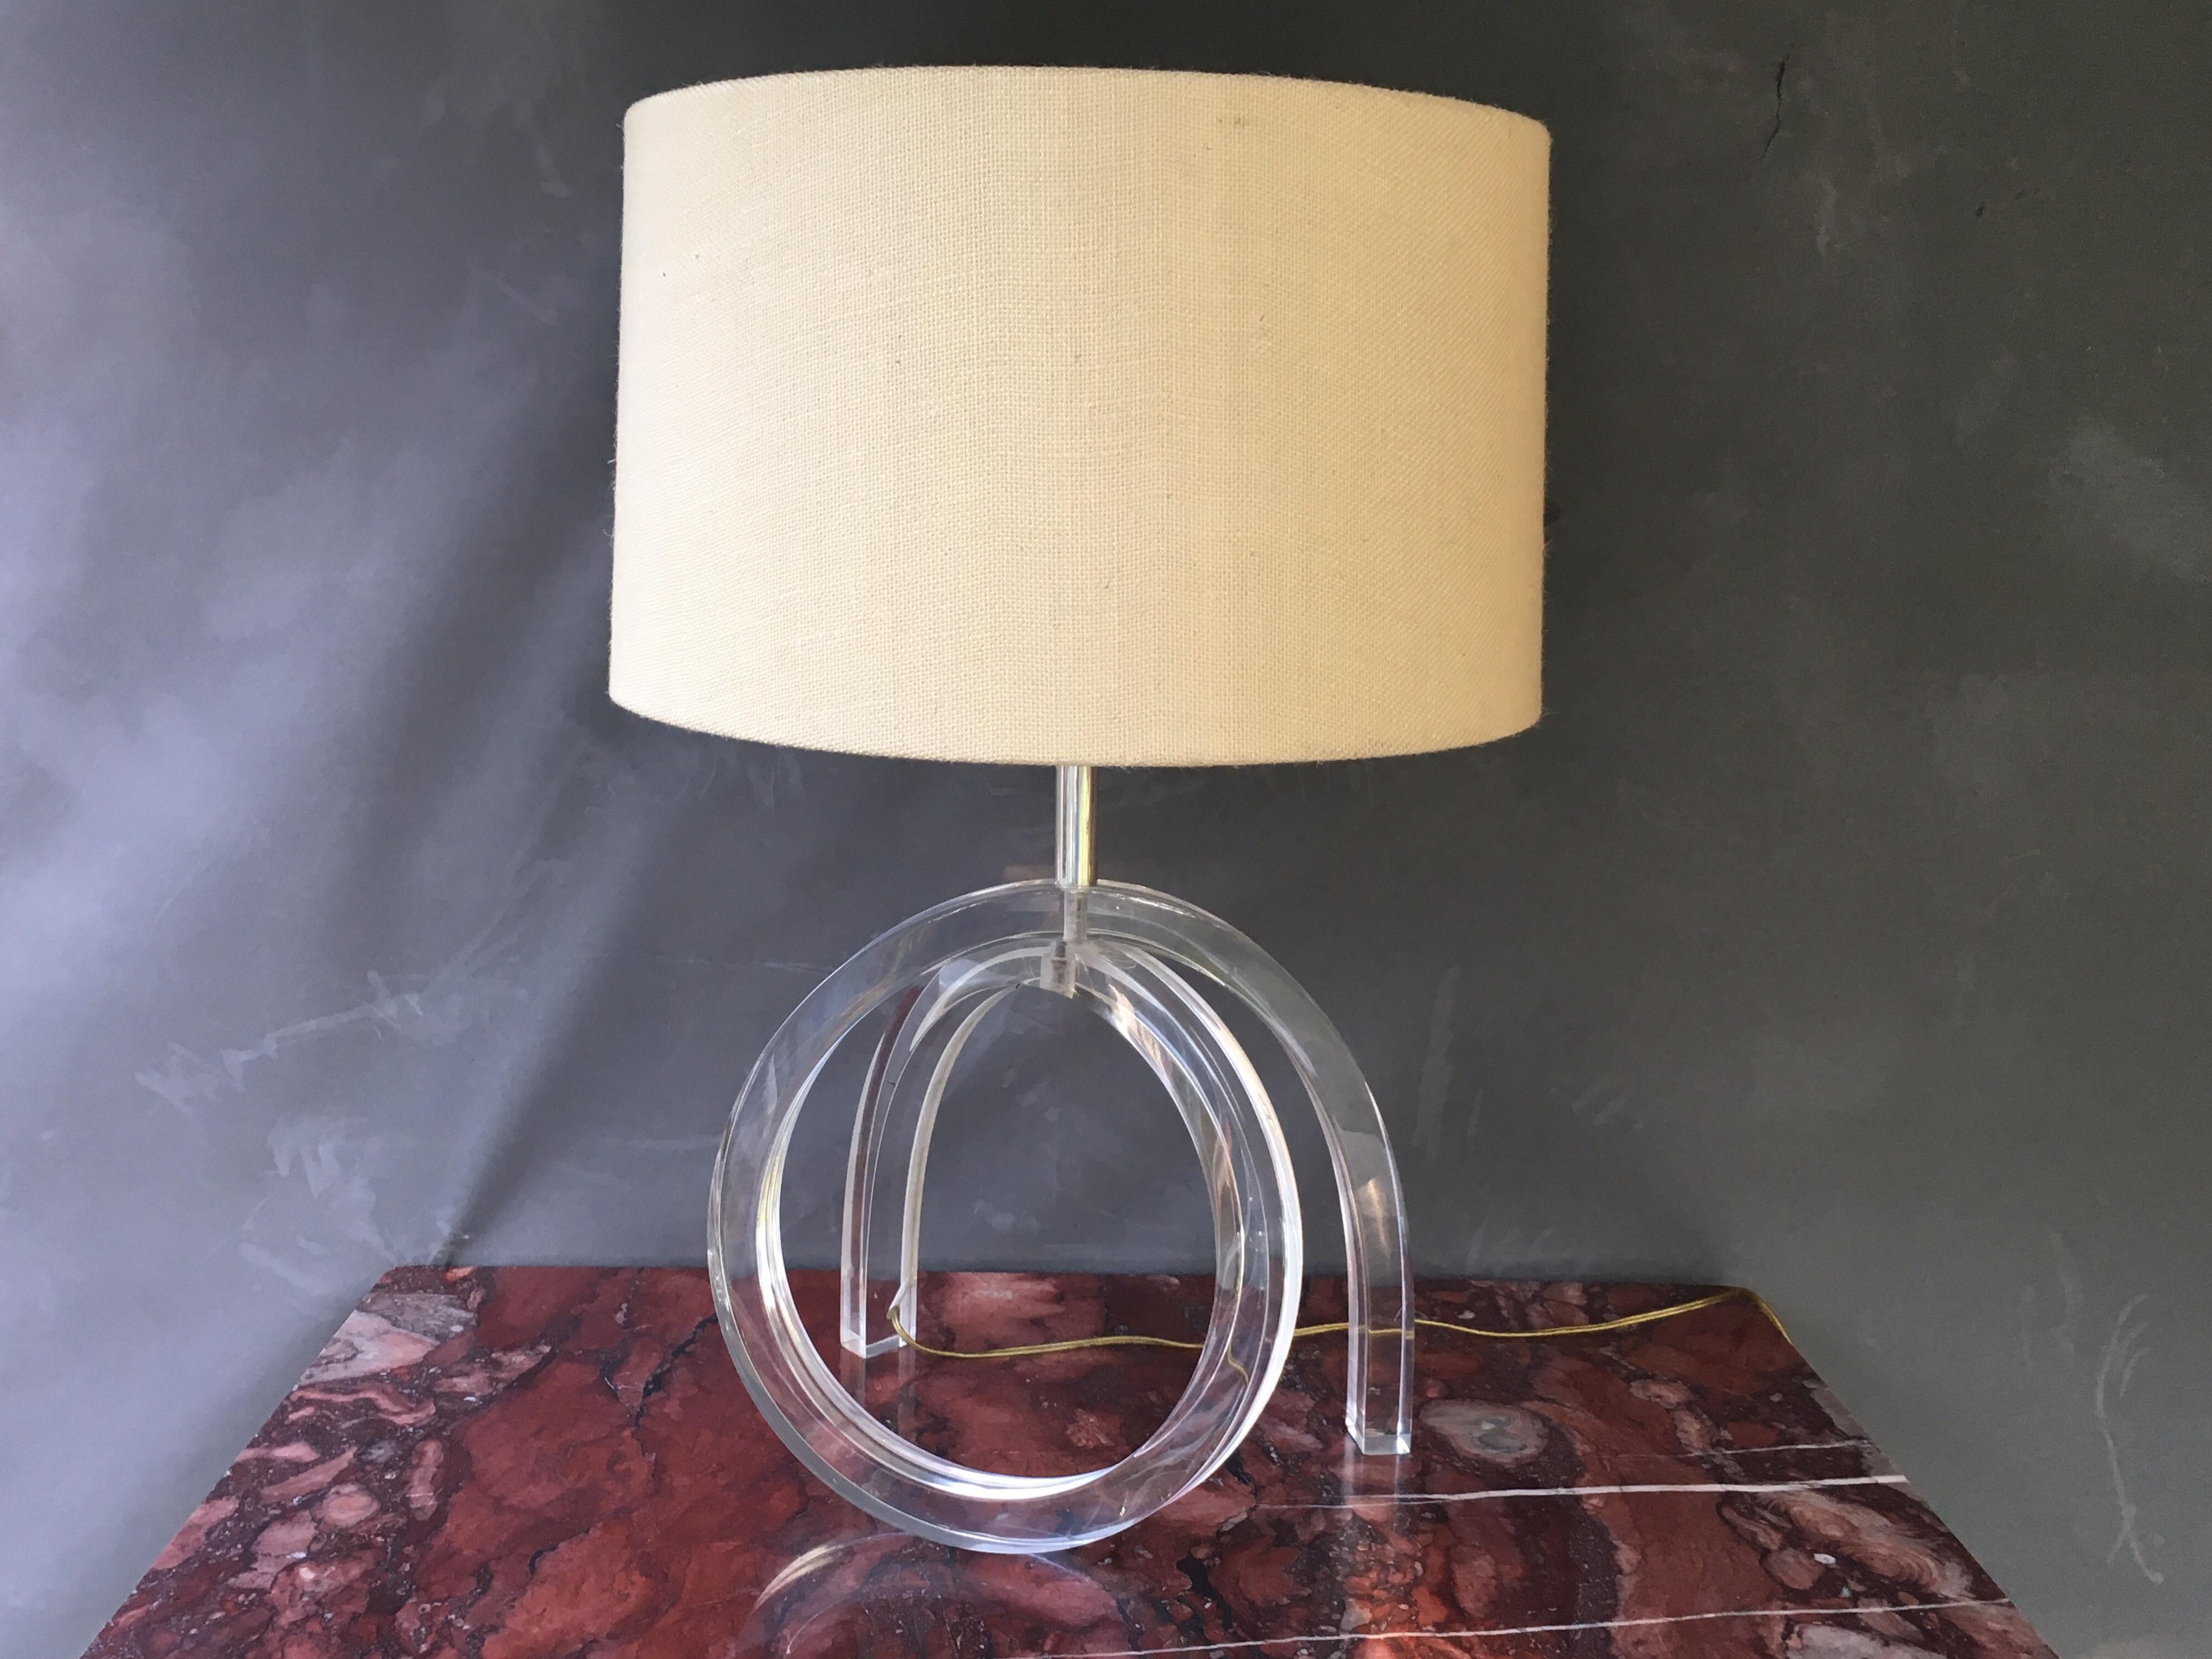 Acrylic sculptural lamp, 20th century.
Beautiful form, recently re-wired. Shade has some fading on one side. Comes with shade unless otherwise advised.
Measures: 13.75